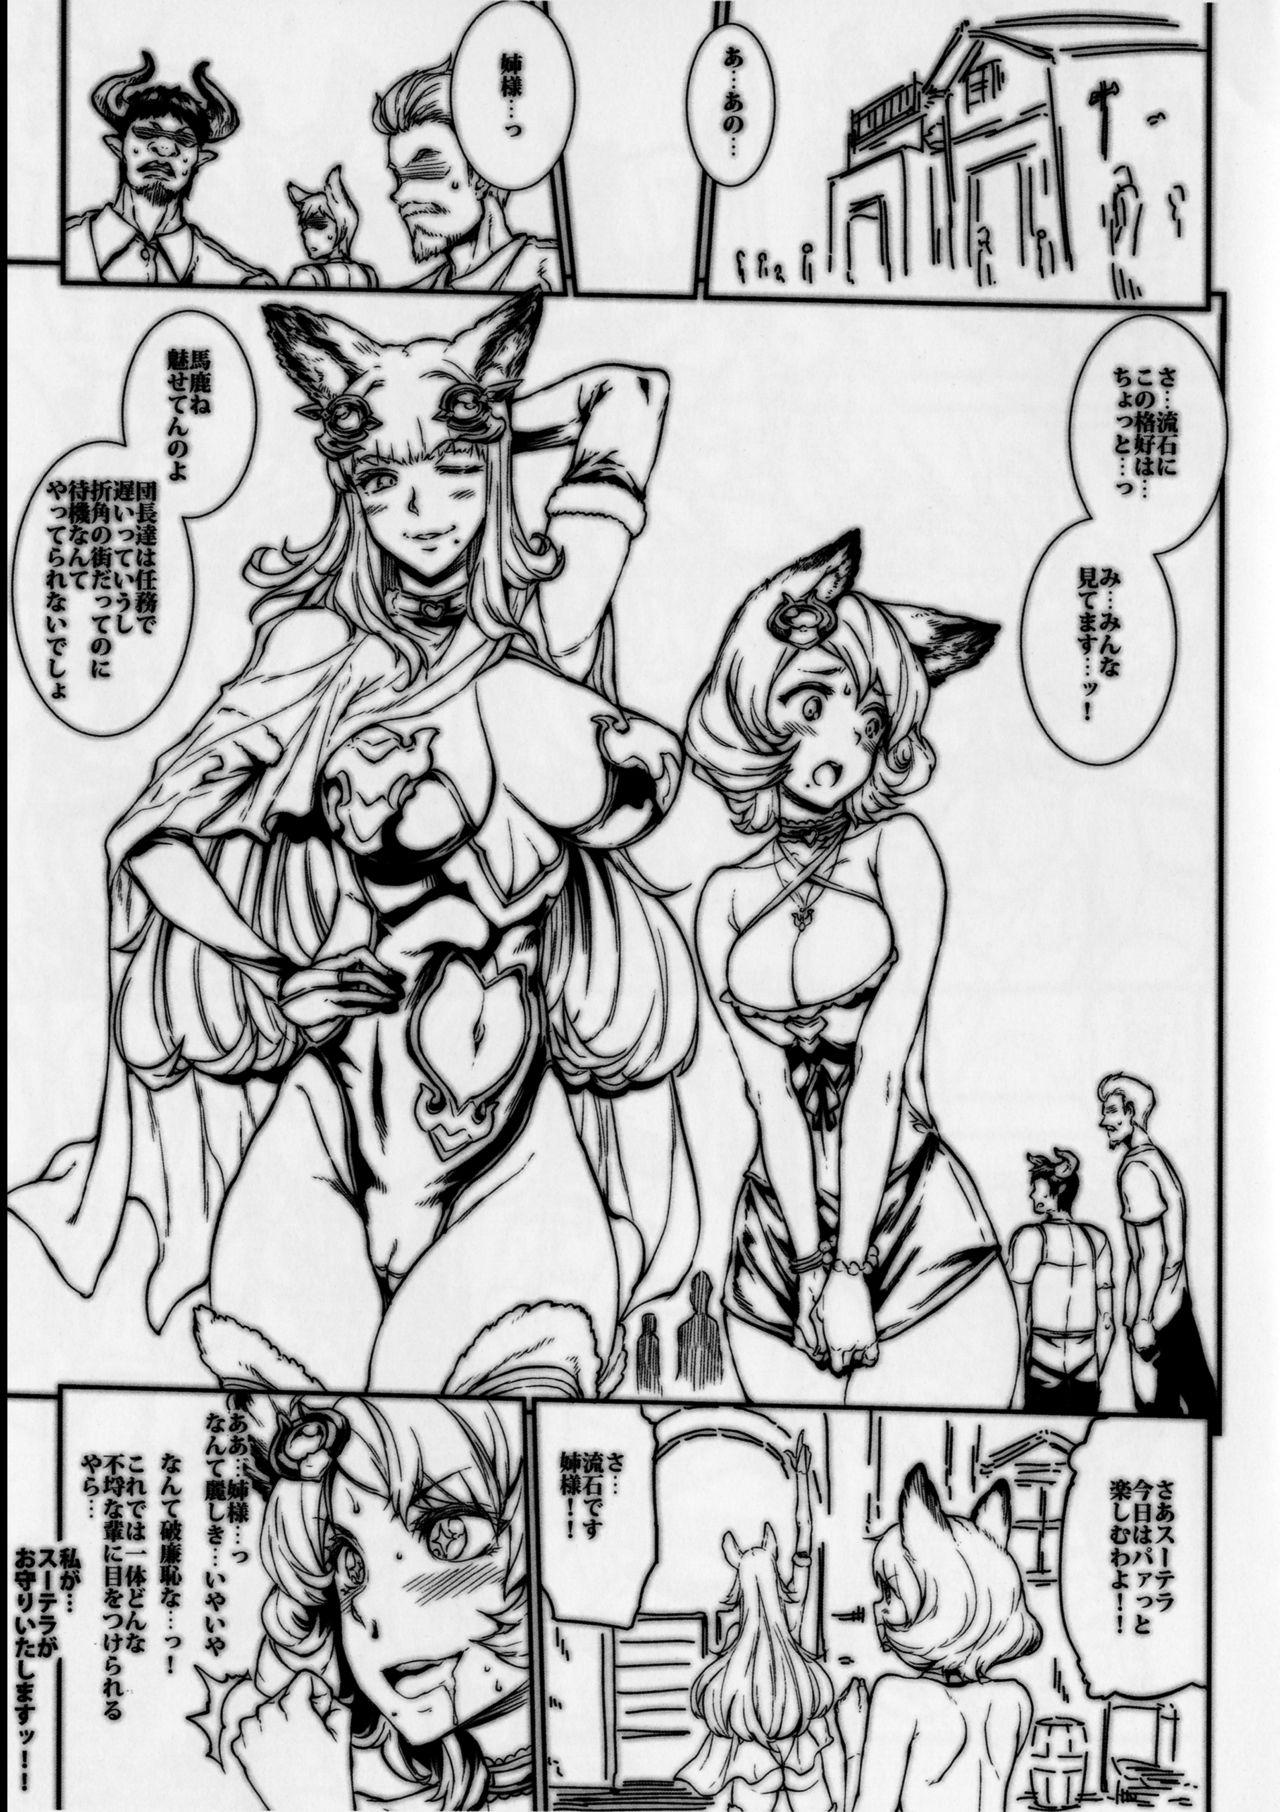 Female Domination BITCH & WITCH Preview Ban ＋ Tanzaku Poster - Granblue fantasy Twerking - Page 2